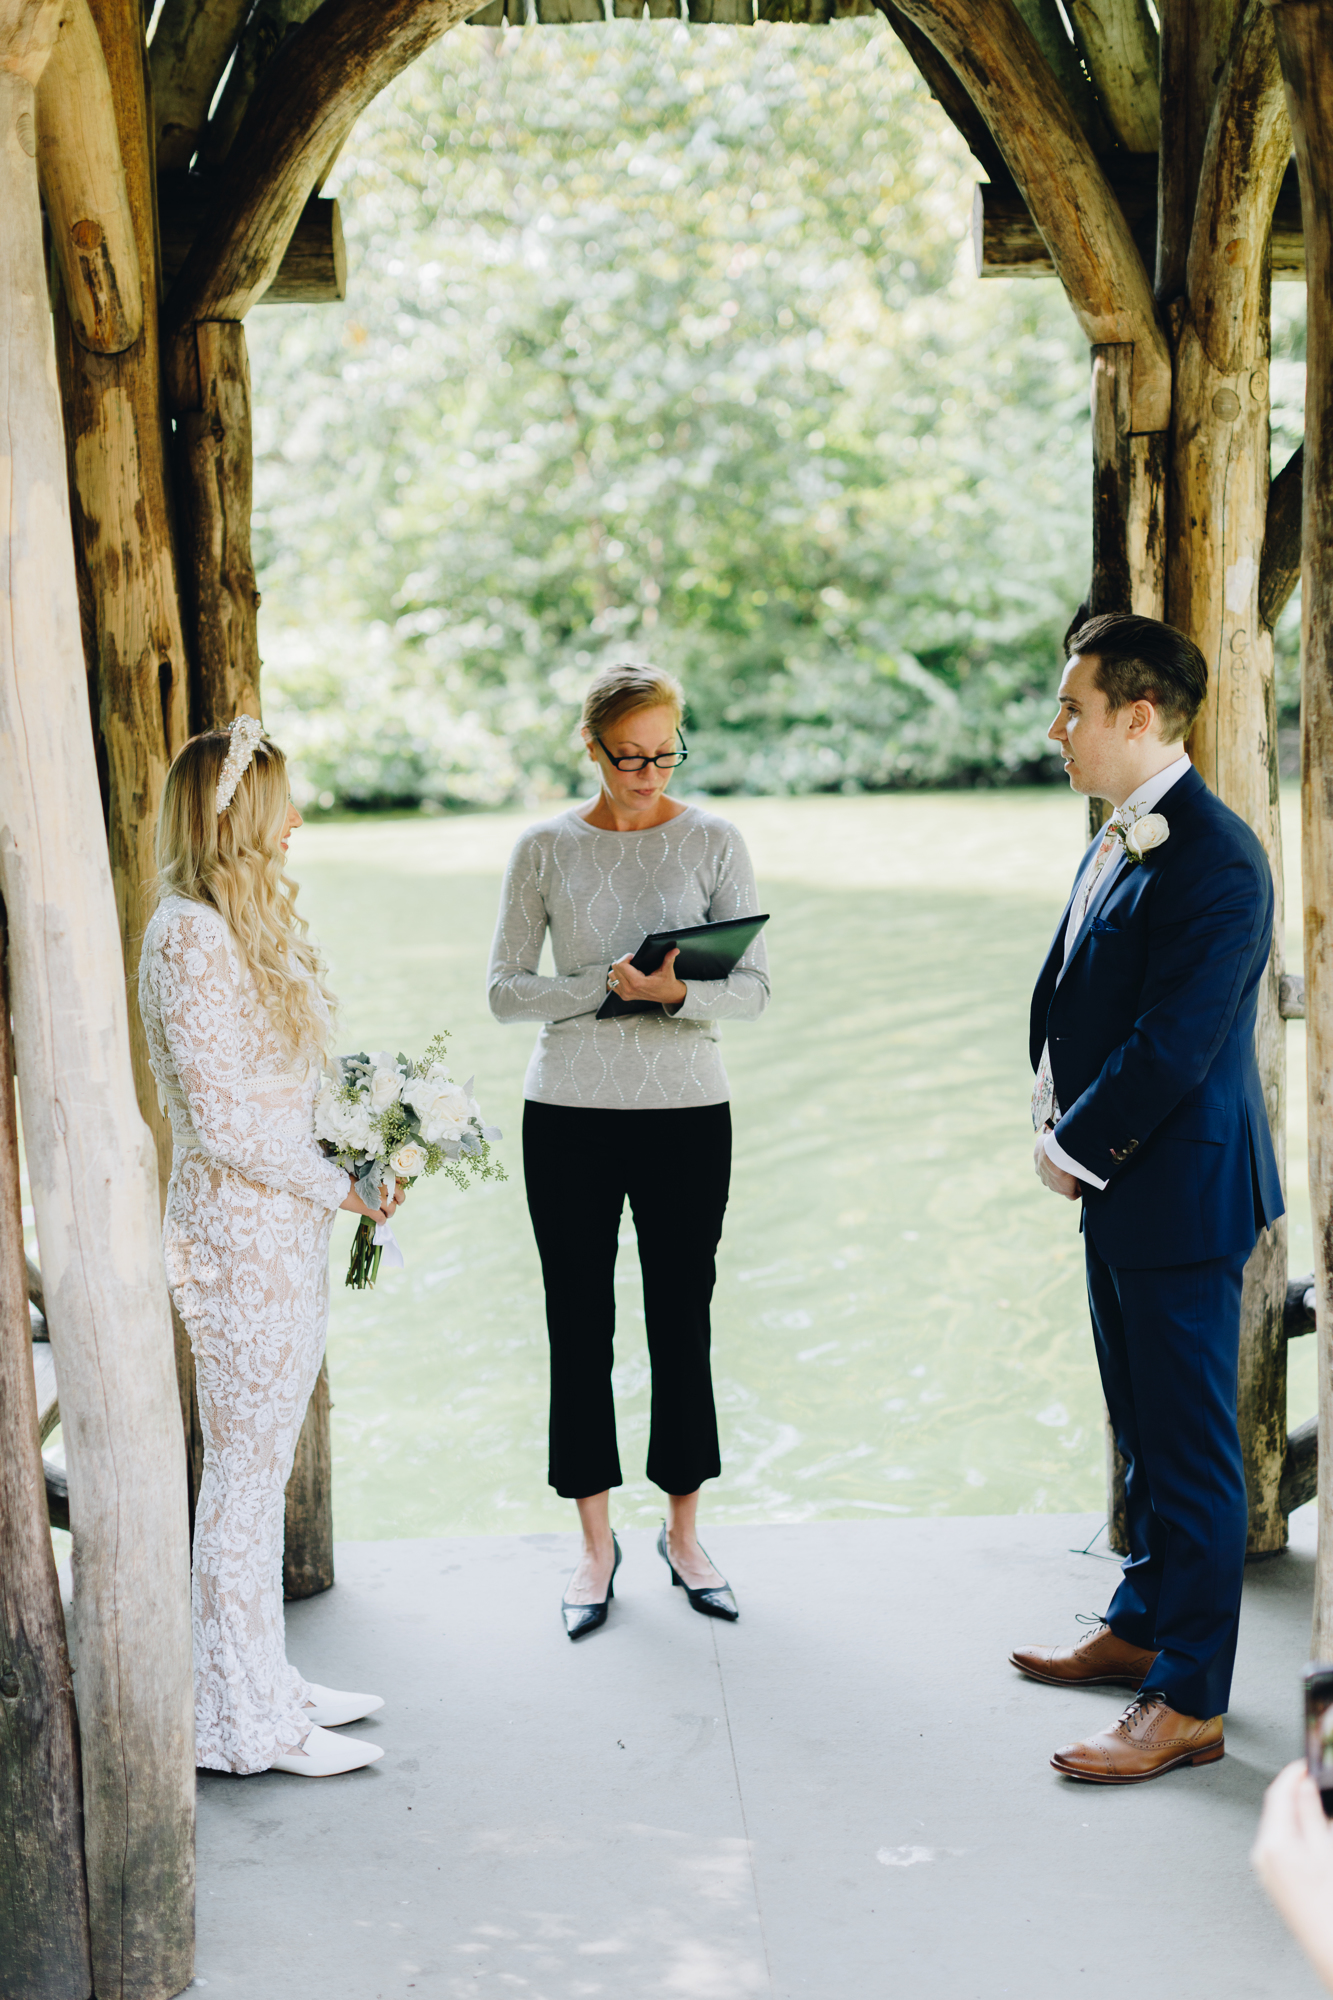 Romantic and cinematic Central Park elopement locations